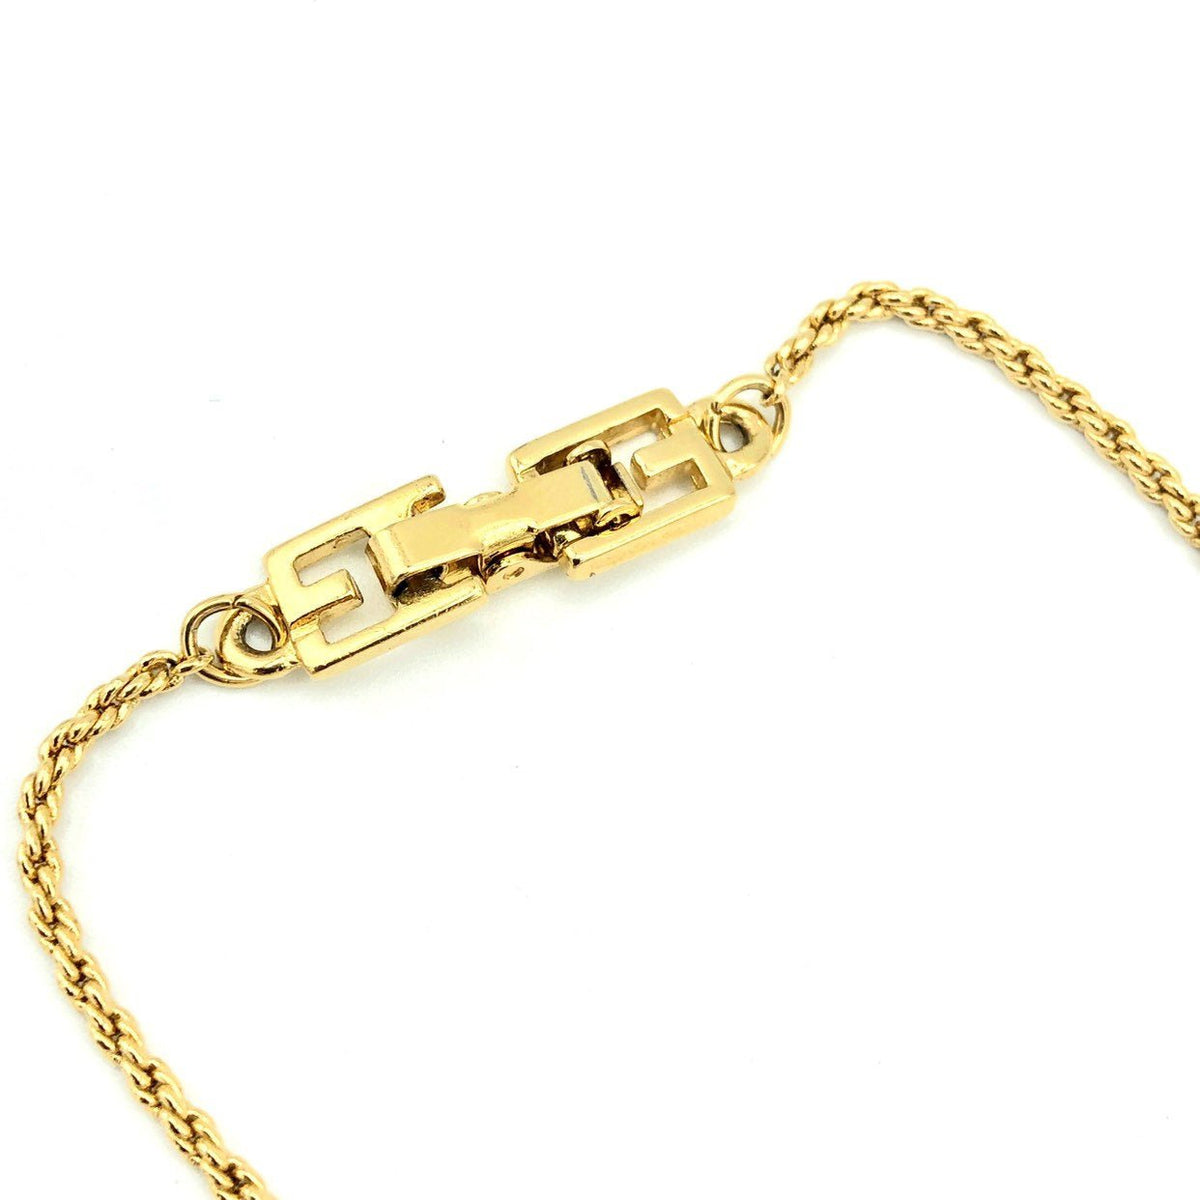 Givenchy Gold Classic Black Enamel 'G' Vintage Pendant - 24 Wishes Vintage Jewelry